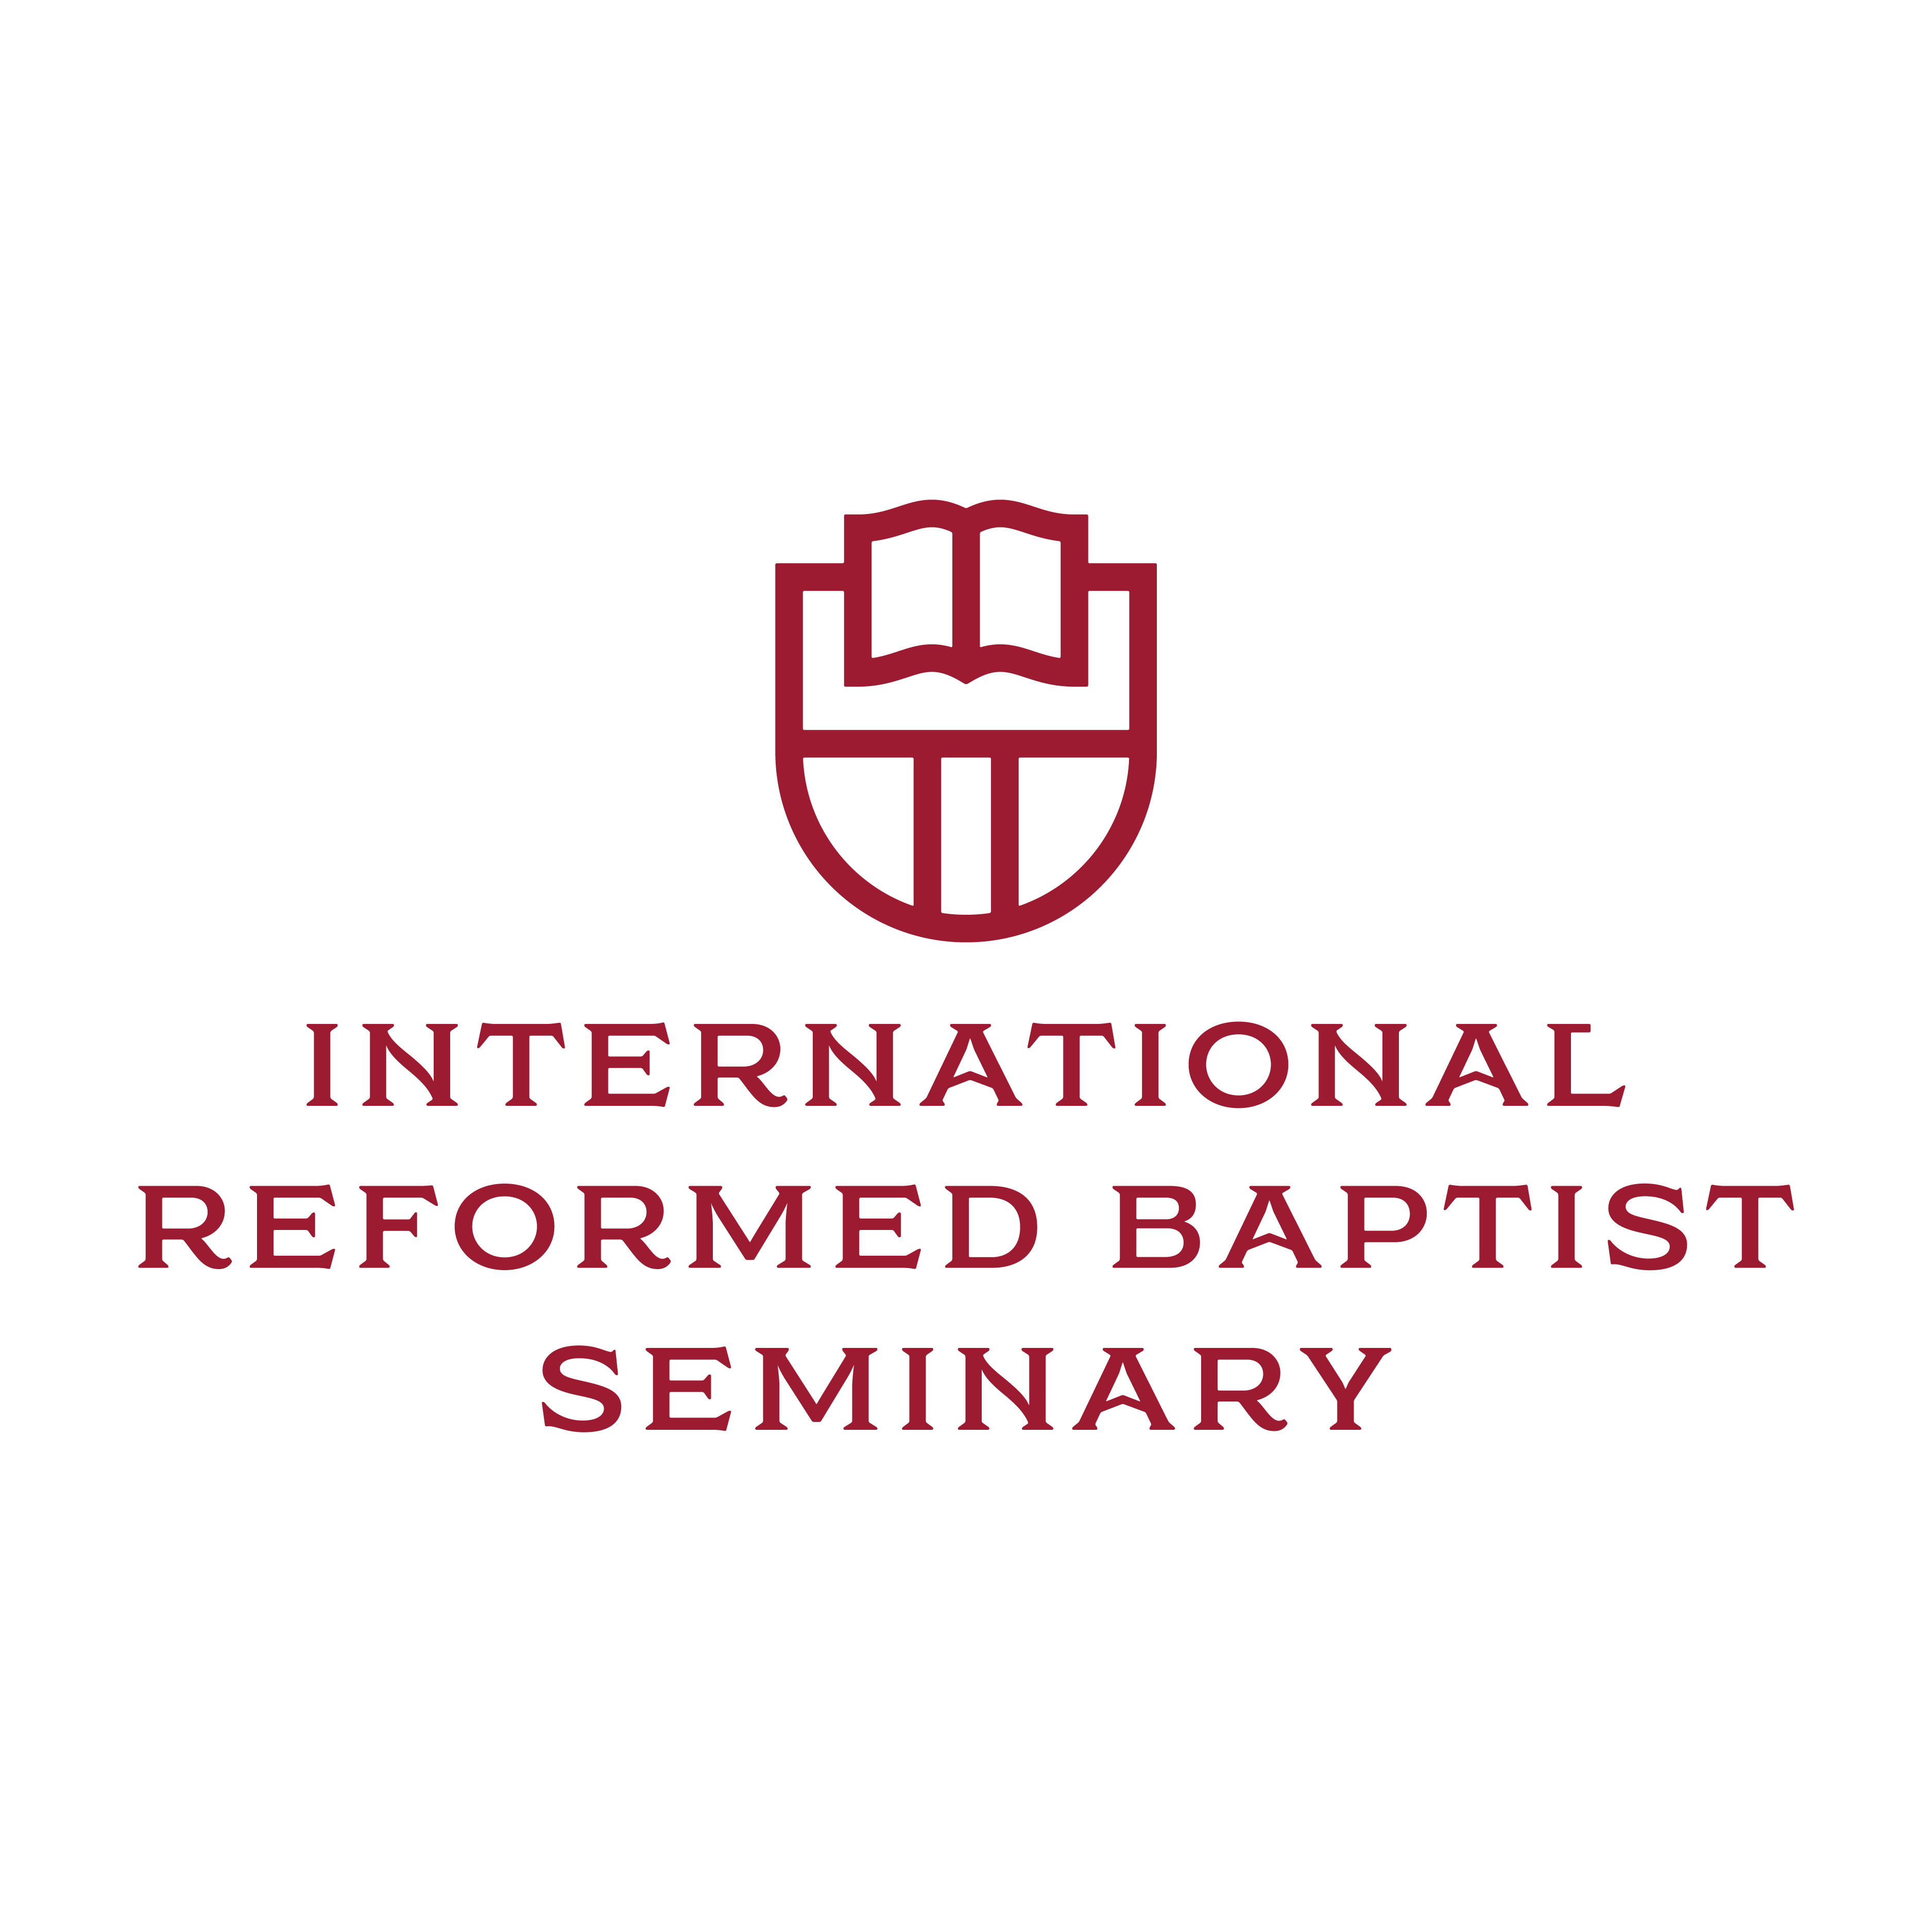 International Reformed Baptist Seminary logo design by logo designer Decree Design Co for your inspiration and for the worlds largest logo competition